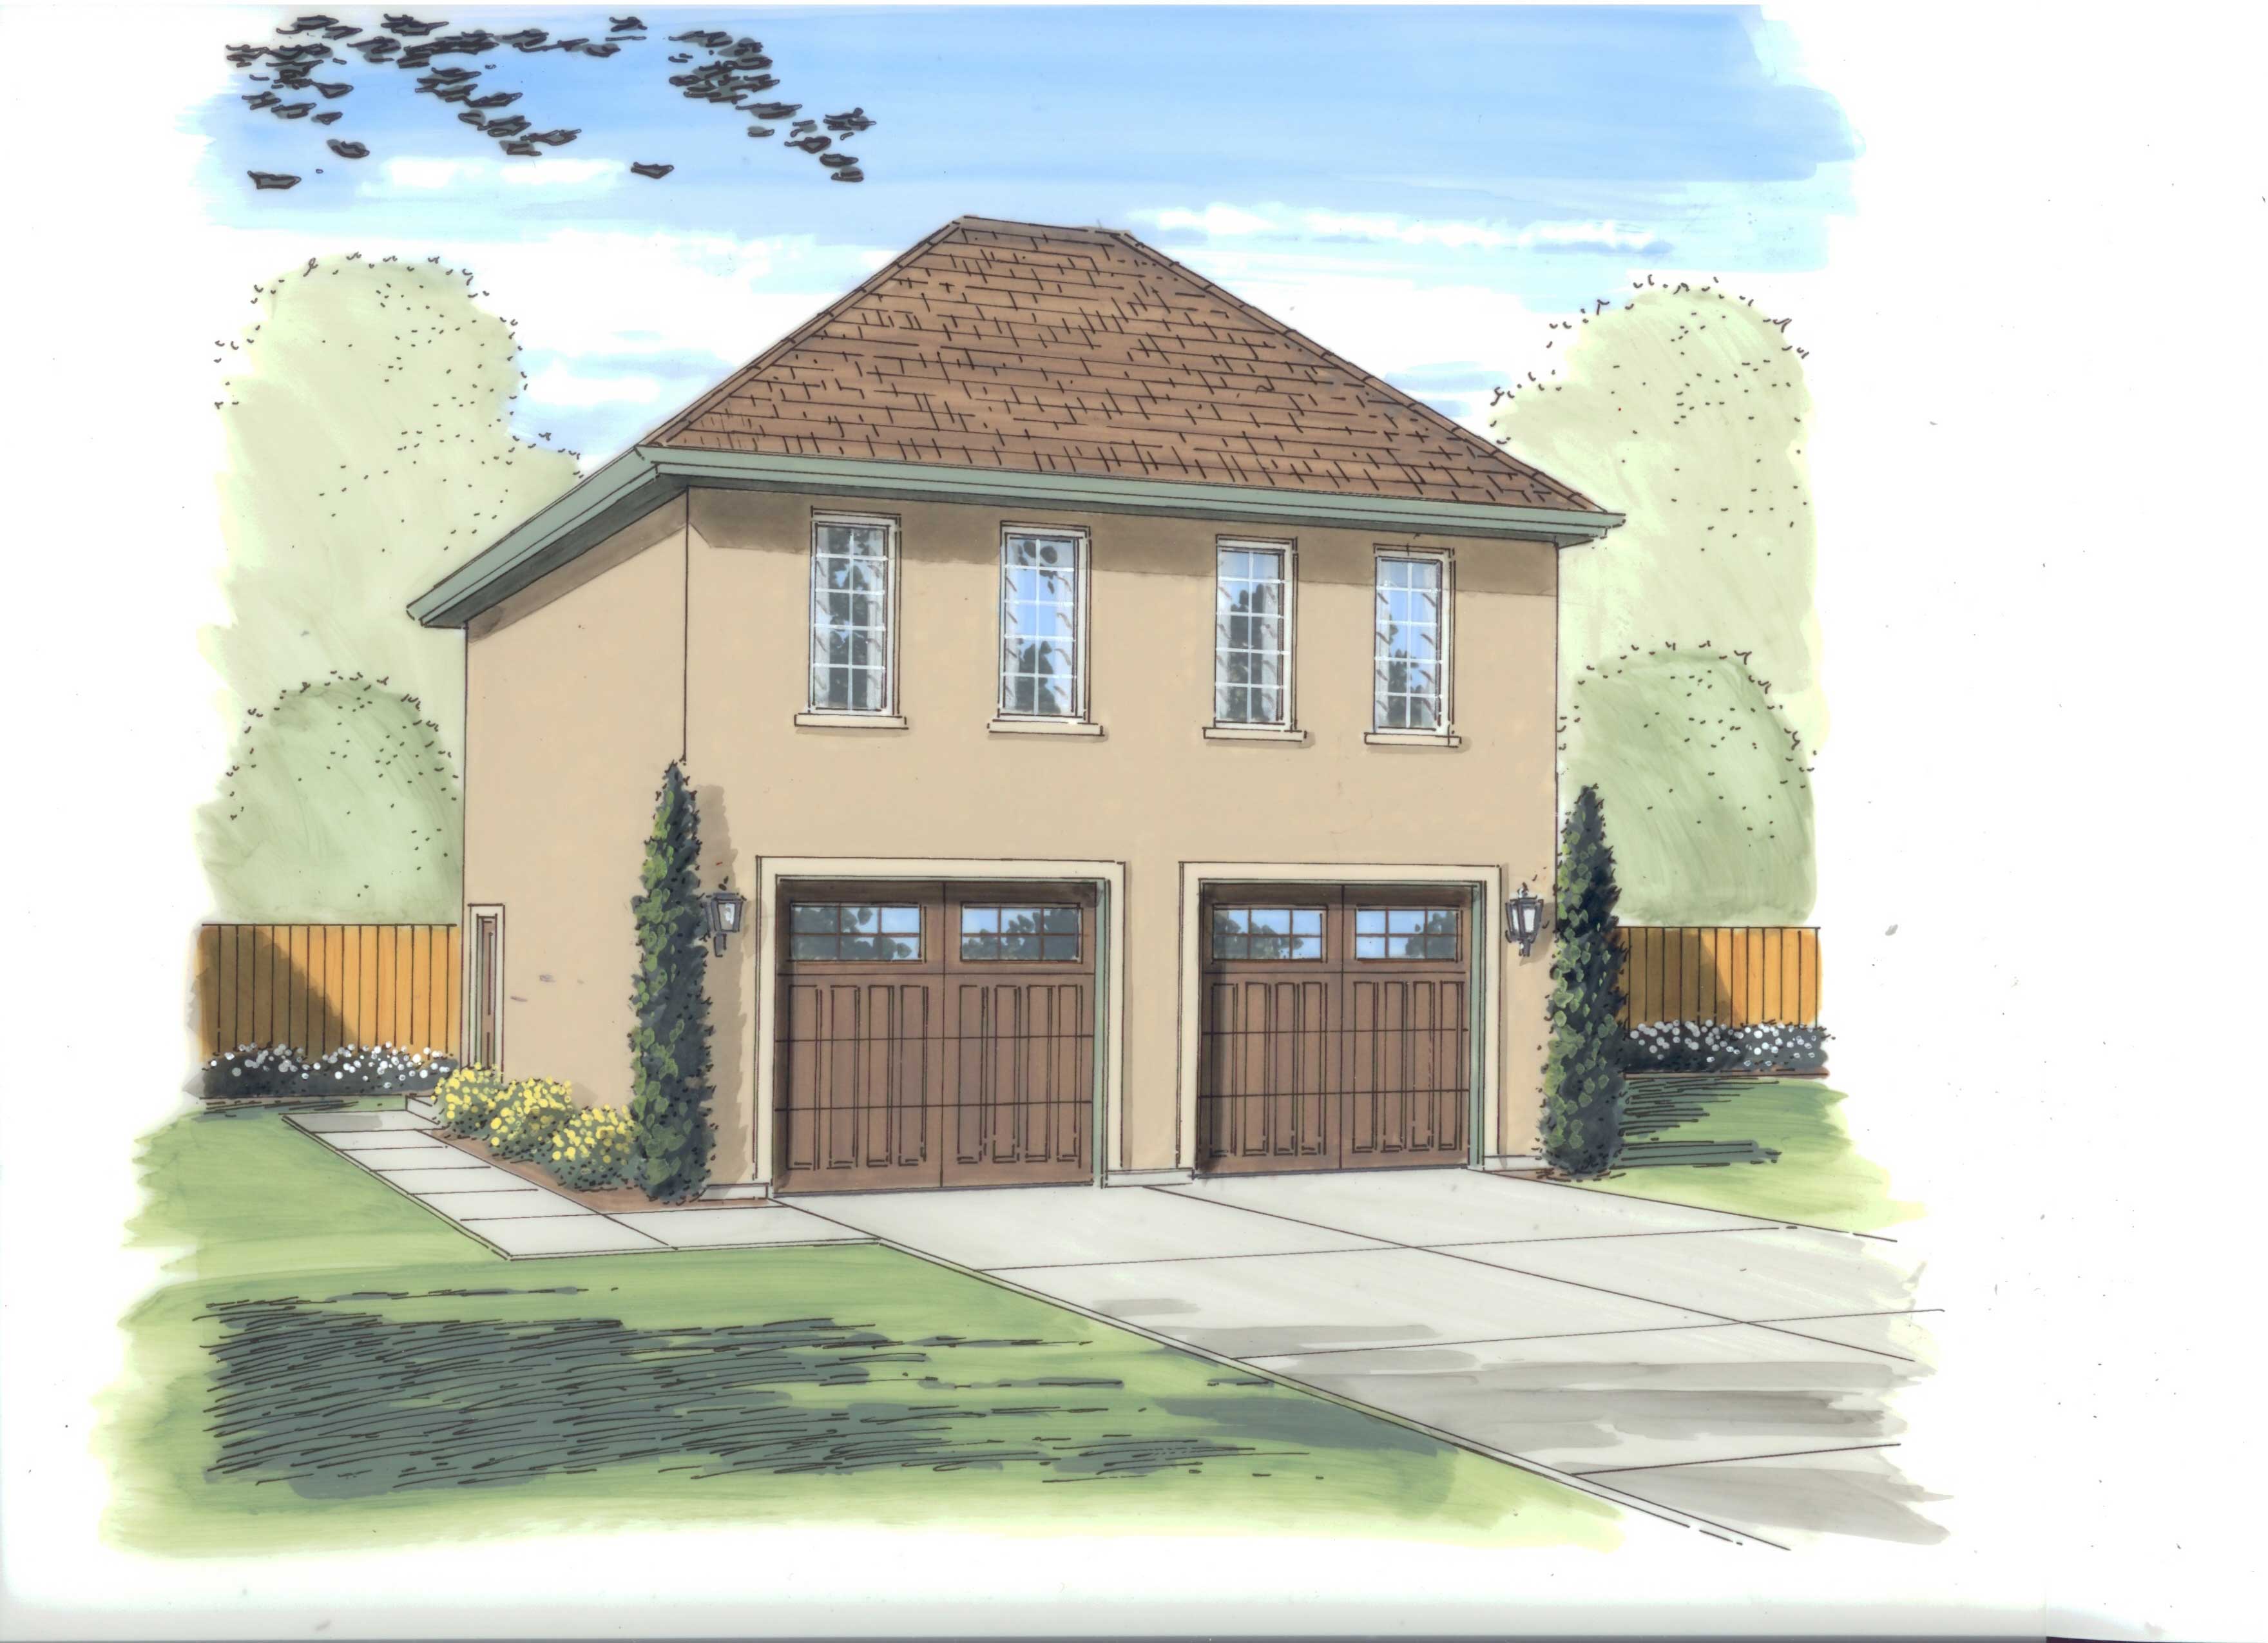 The #100-1056 is a sleek, stylish garage plan with a nice apartment upstair...